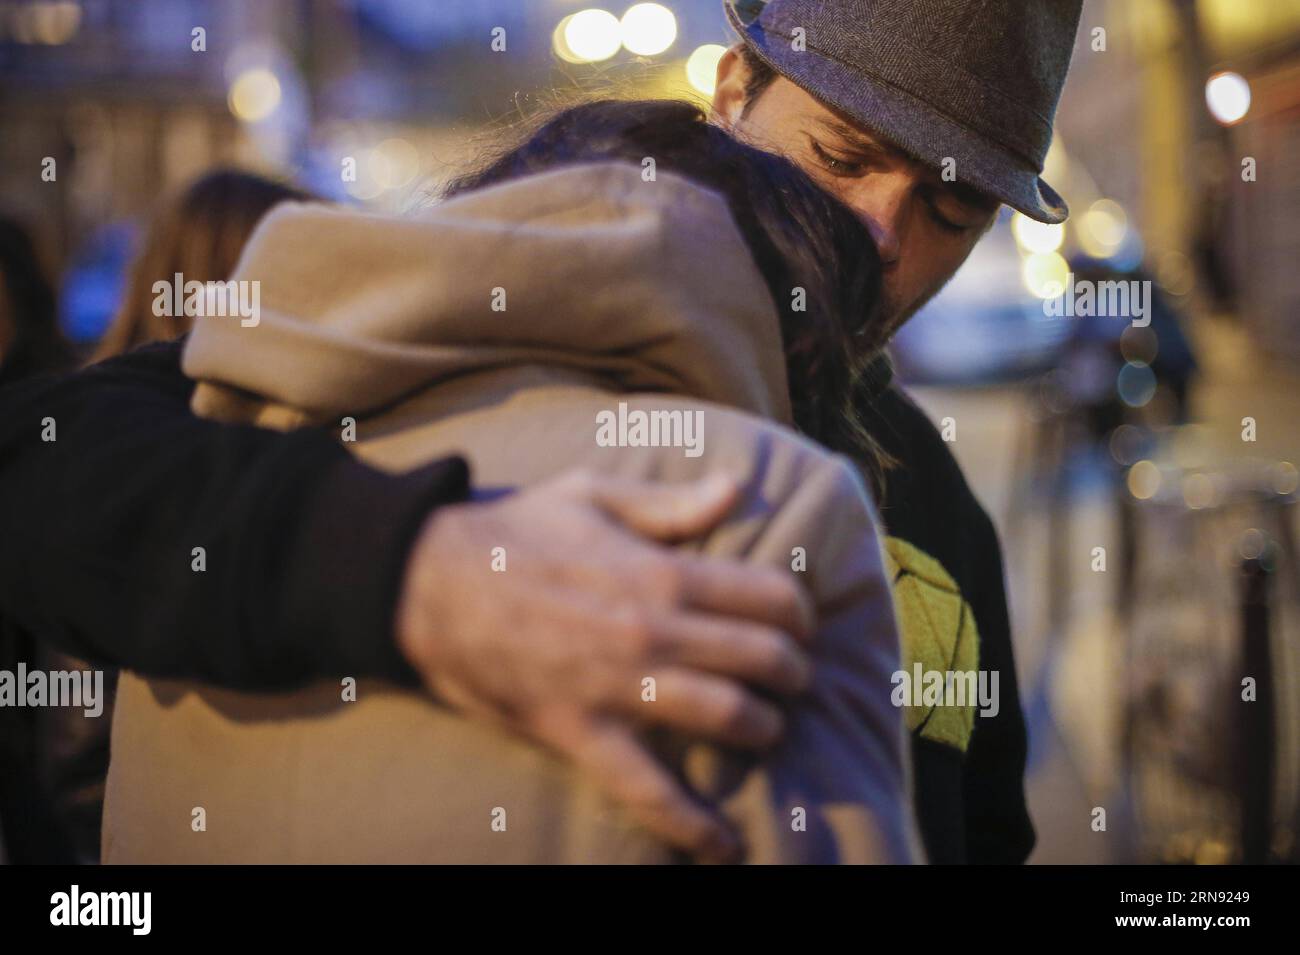 (151114) -- PARIS, Nov. 14, 2015 -- A couple mourns for victims in front of the Le Petit Cambodge Restaurant where an attack happend on Friday in Paris, France, Nov. 14, 2015. French President Francois Hollande announced a three-days national mourning on Saturday. ) FRANCE-PARIS-ATTACKS-MOURNING ZhouxLei PUBLICATIONxNOTxINxCHN Terroranschläge in Paris - Tatort Le Petit Cambodge - Gedenken an die Opfer   151114 Paris Nov 14 2015 a COUPLE mourns for Victims in Front of The Le Petit Cambodge Restaurant Where to Attack Happend ON Friday in Paris France Nov 14 2015 French President François Holland Stock Photo